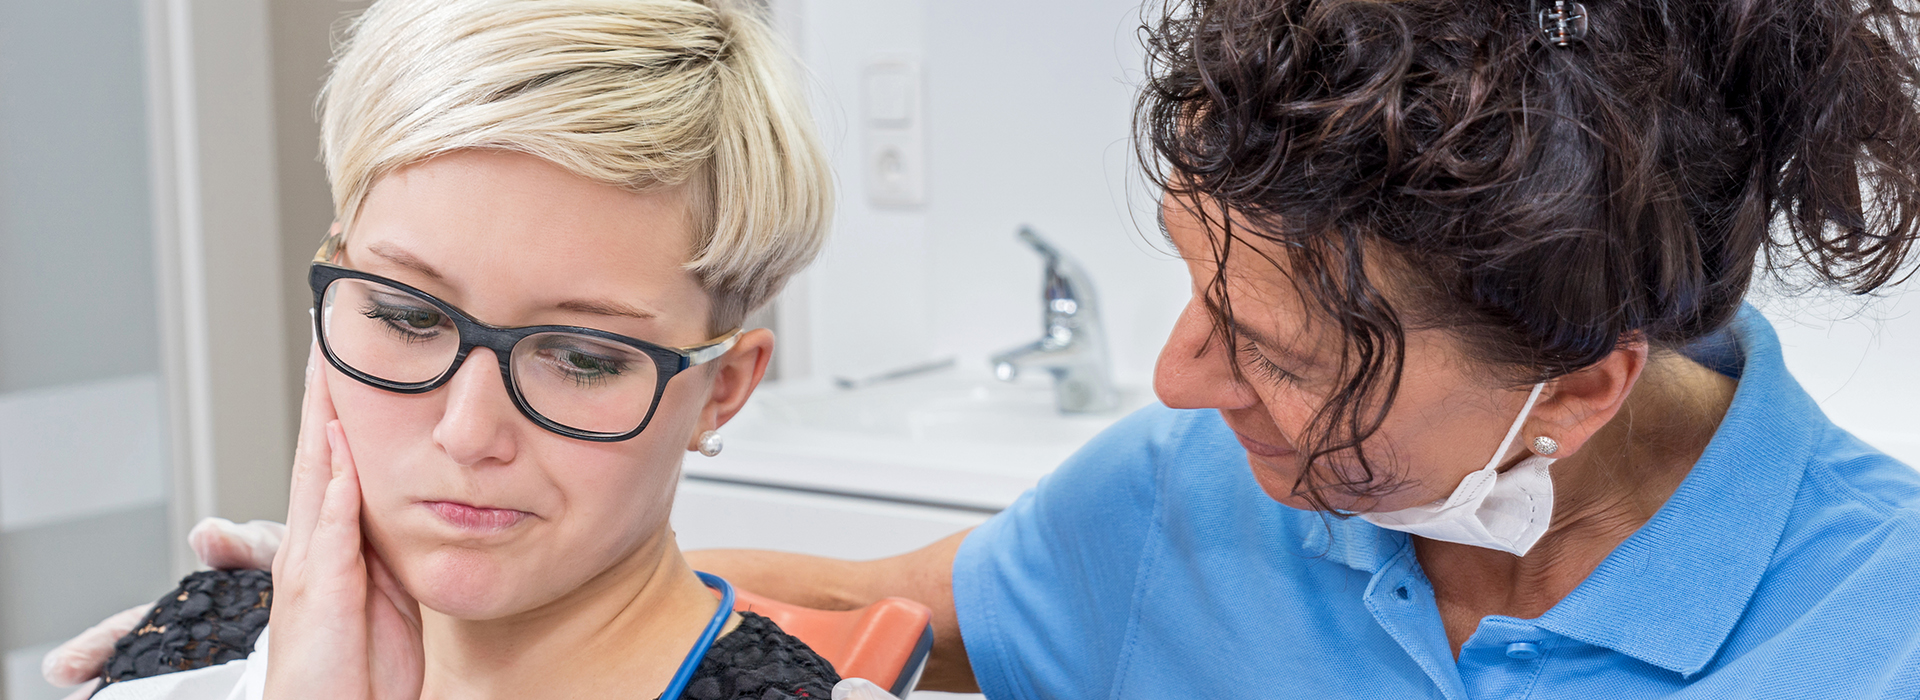 The image shows a woman with a shaved head being attended to by a professional in what appears to be a dental or beauty setting.